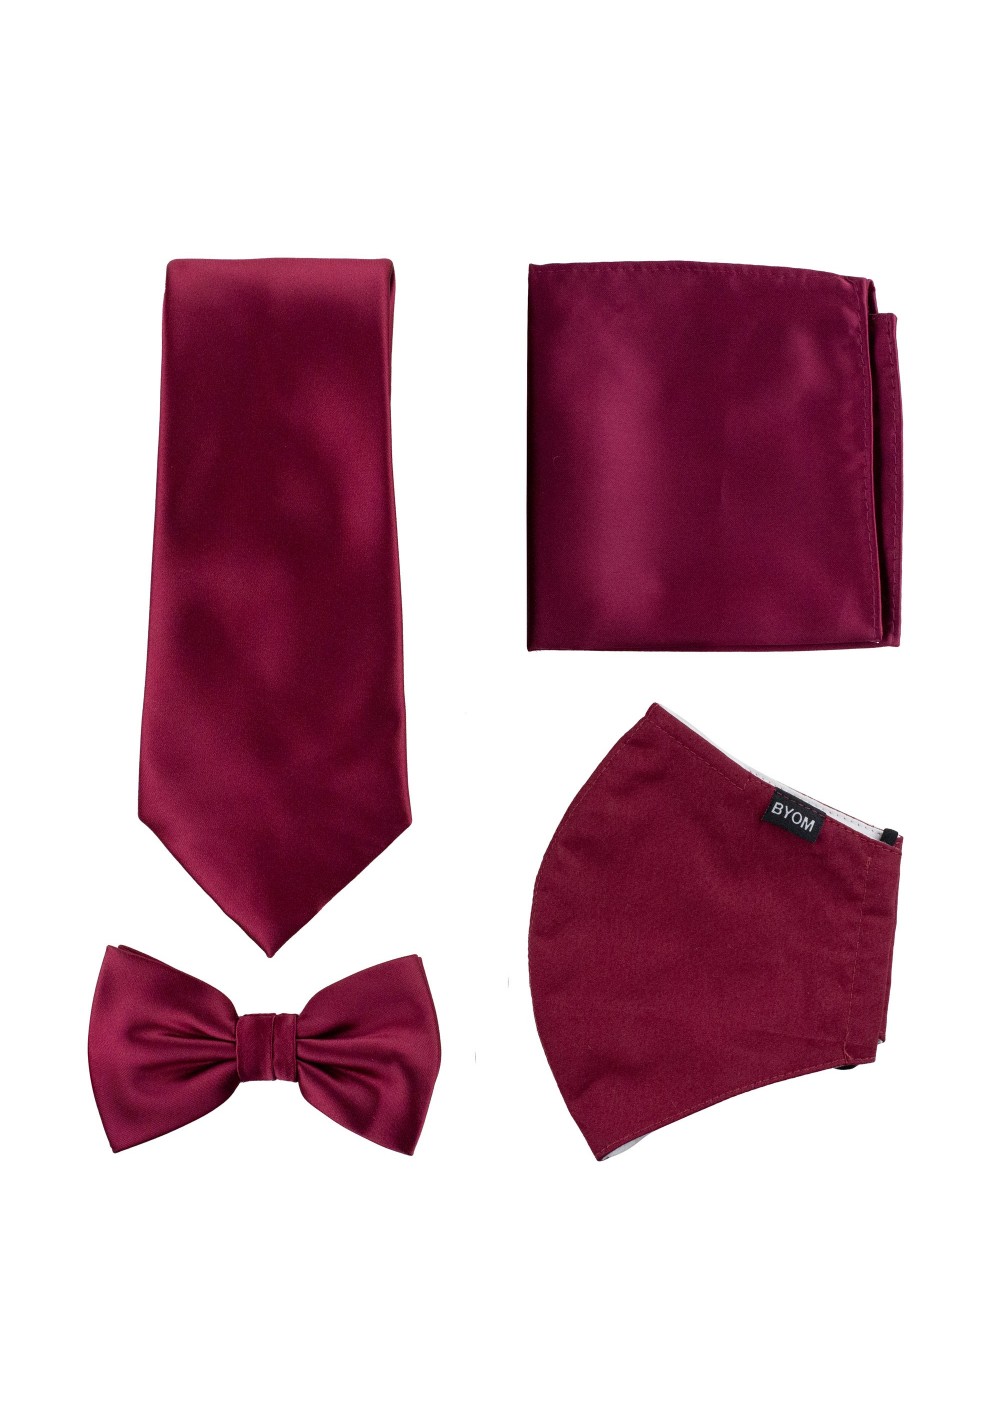 Burgundy Red Mask and Tie Set